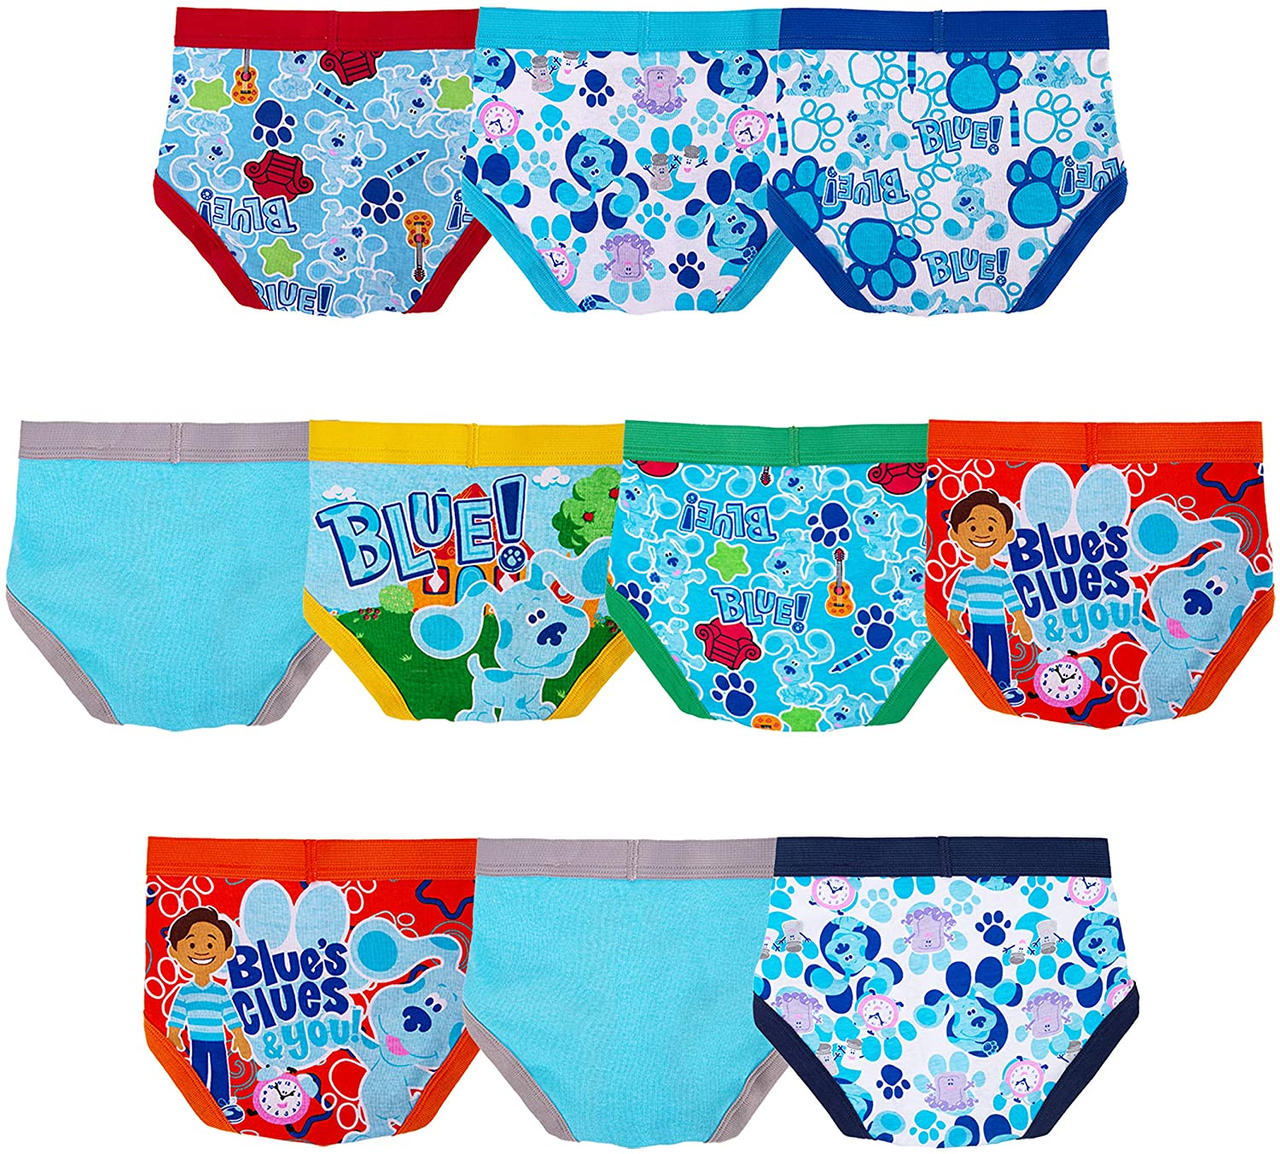 Blue's Clues and You! Boys' Underwear Multipacks by Jack1set2 on